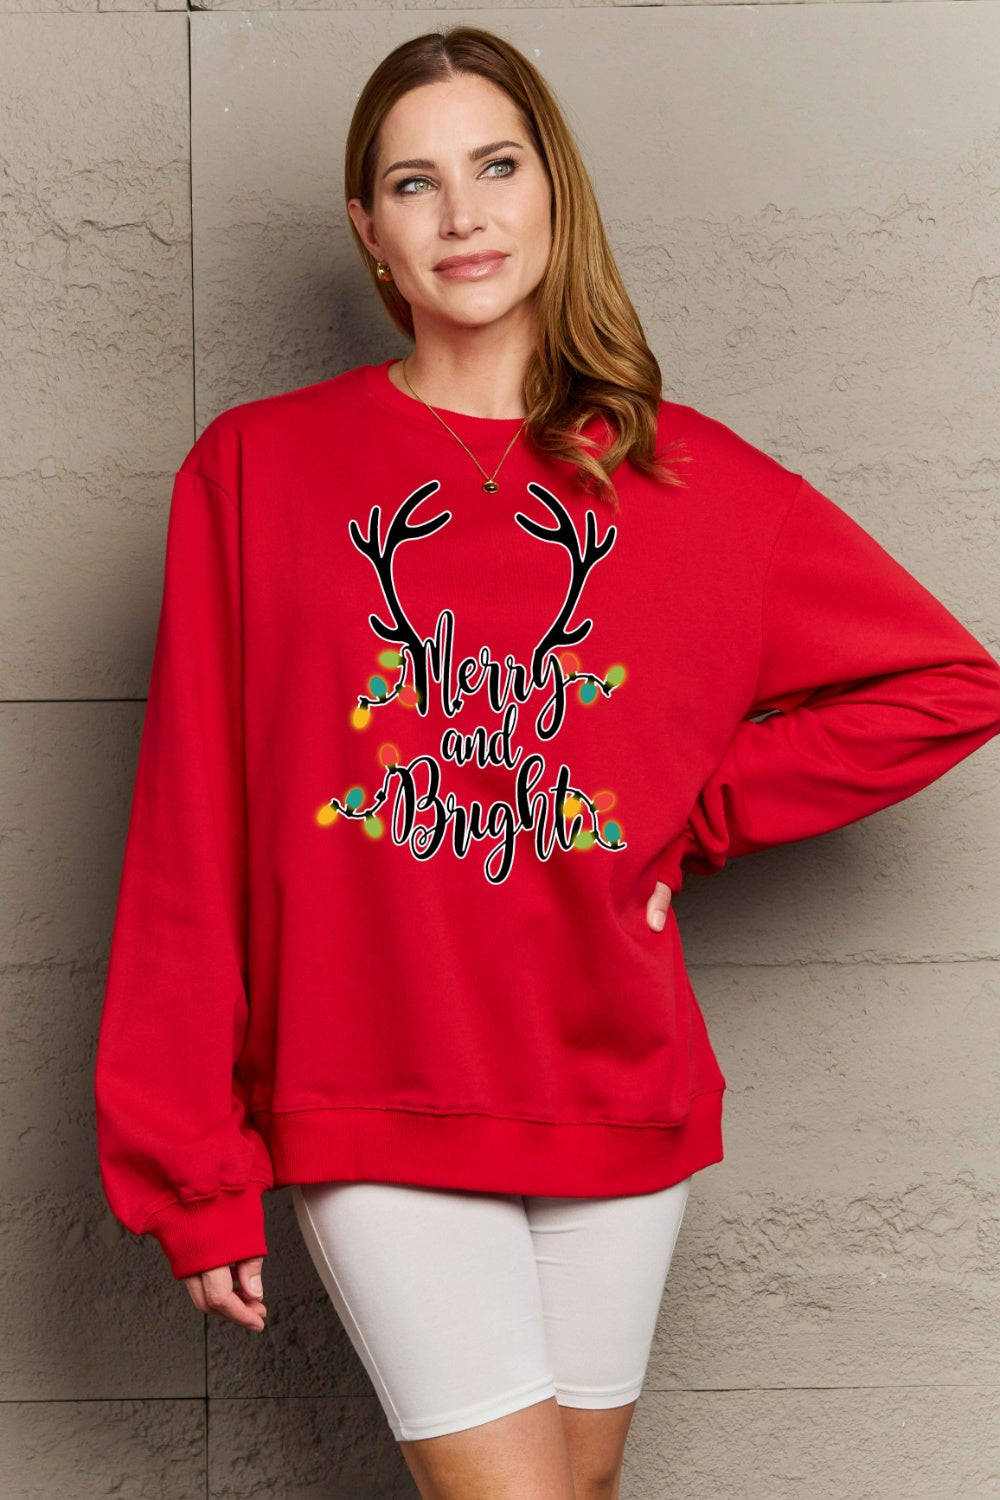 Rosy Brown Simply Love Full Size MERRY AND BRIGHT Graphic Sweatshirt Sentient Beauty Fashions Tops